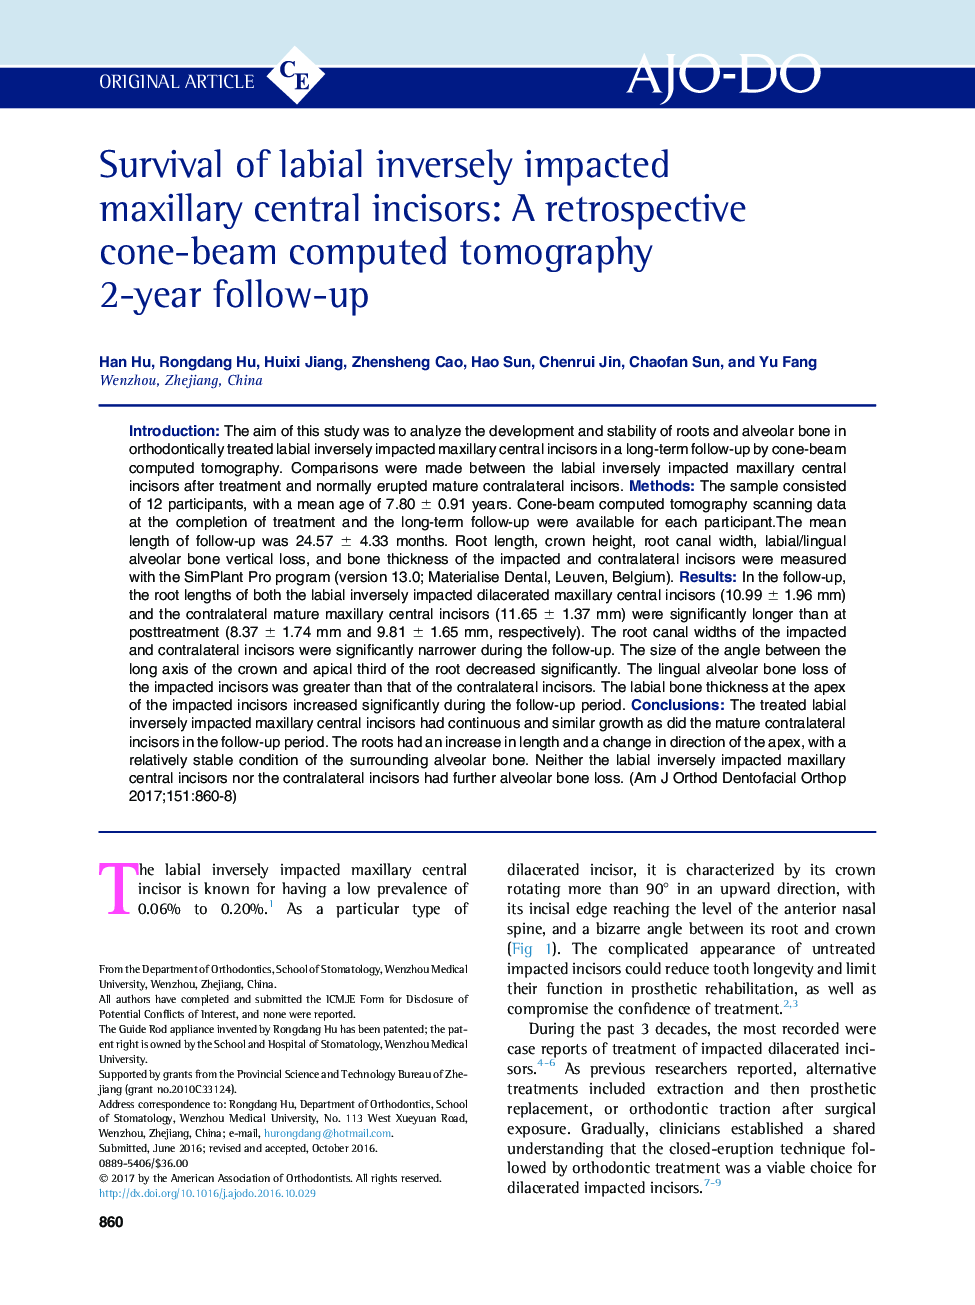 Survival of labial inversely impacted maxillary central incisors: A retrospective cone-beam computed tomography 2-year follow-up